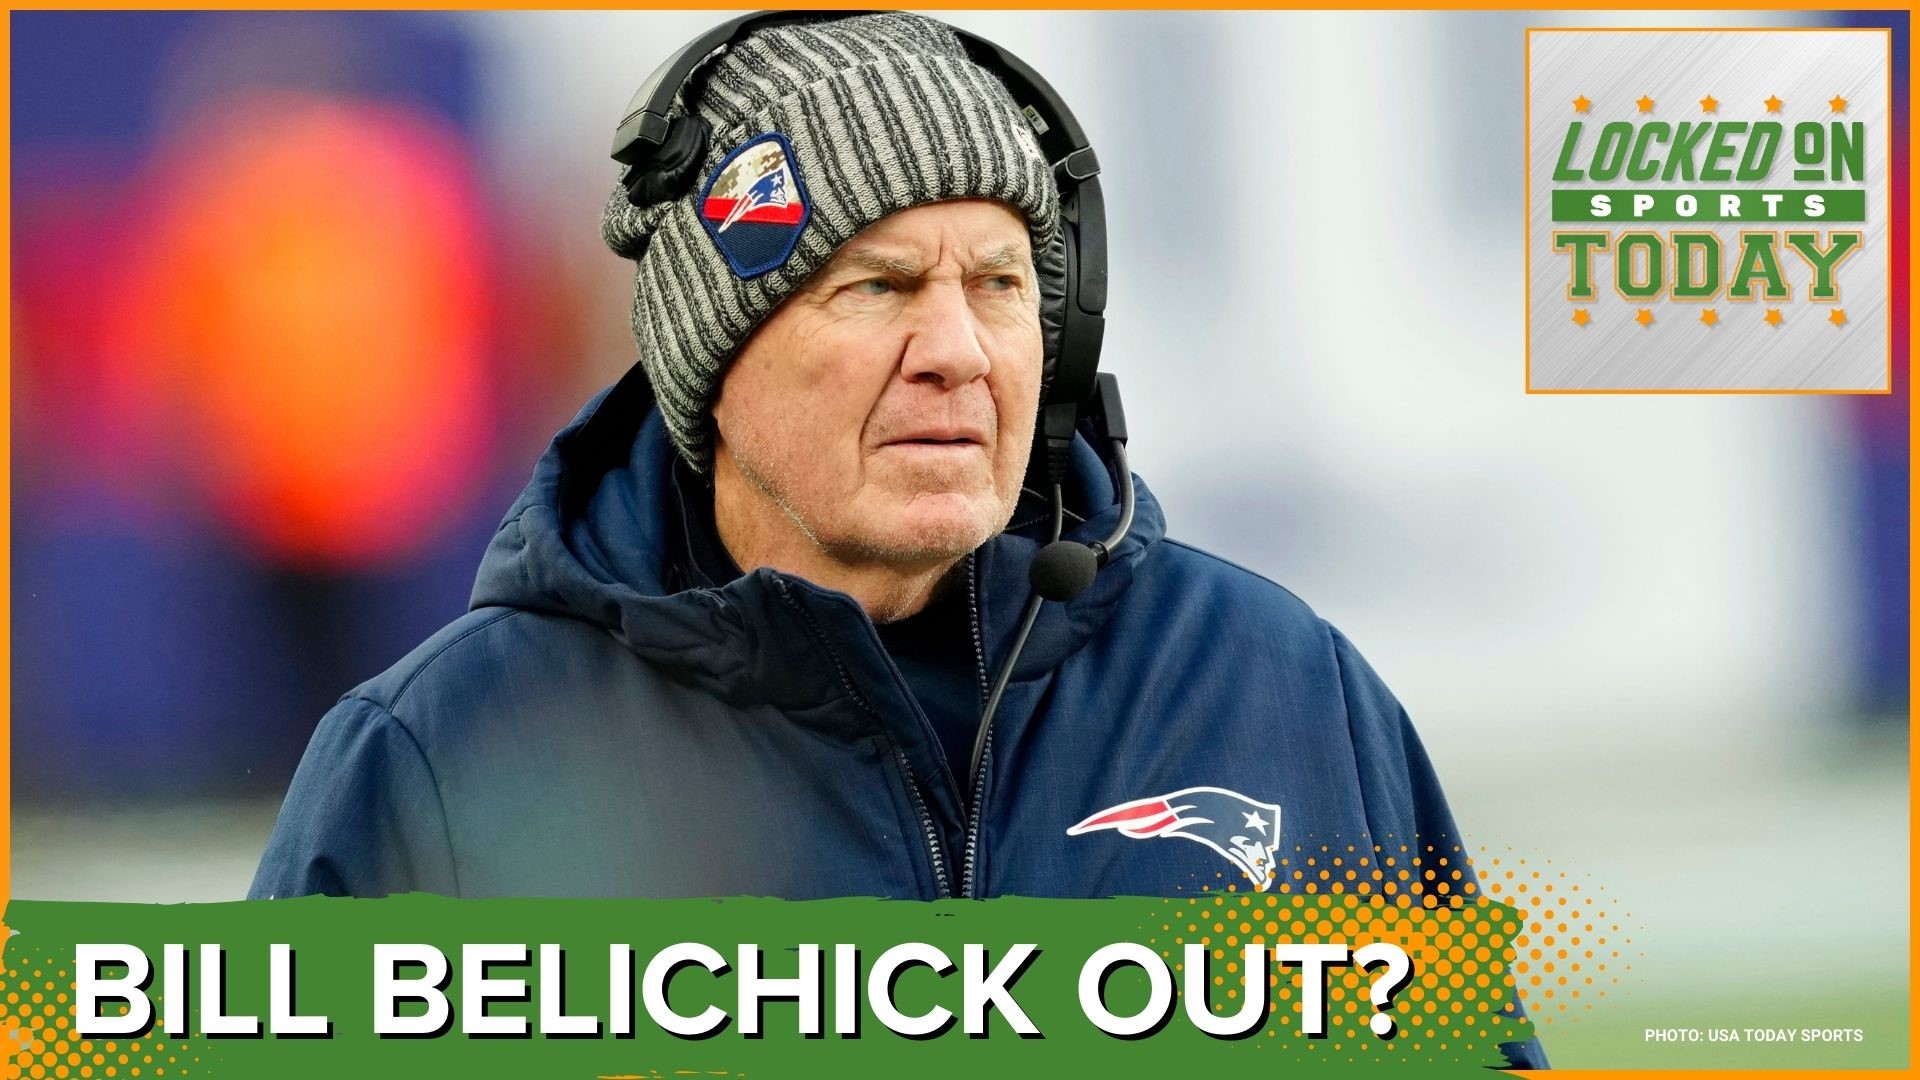 Discussing the day's top sports stories from the possibility of Bill Belichick's last year with the Patriots to the Miami Dolphin's ugly loss.